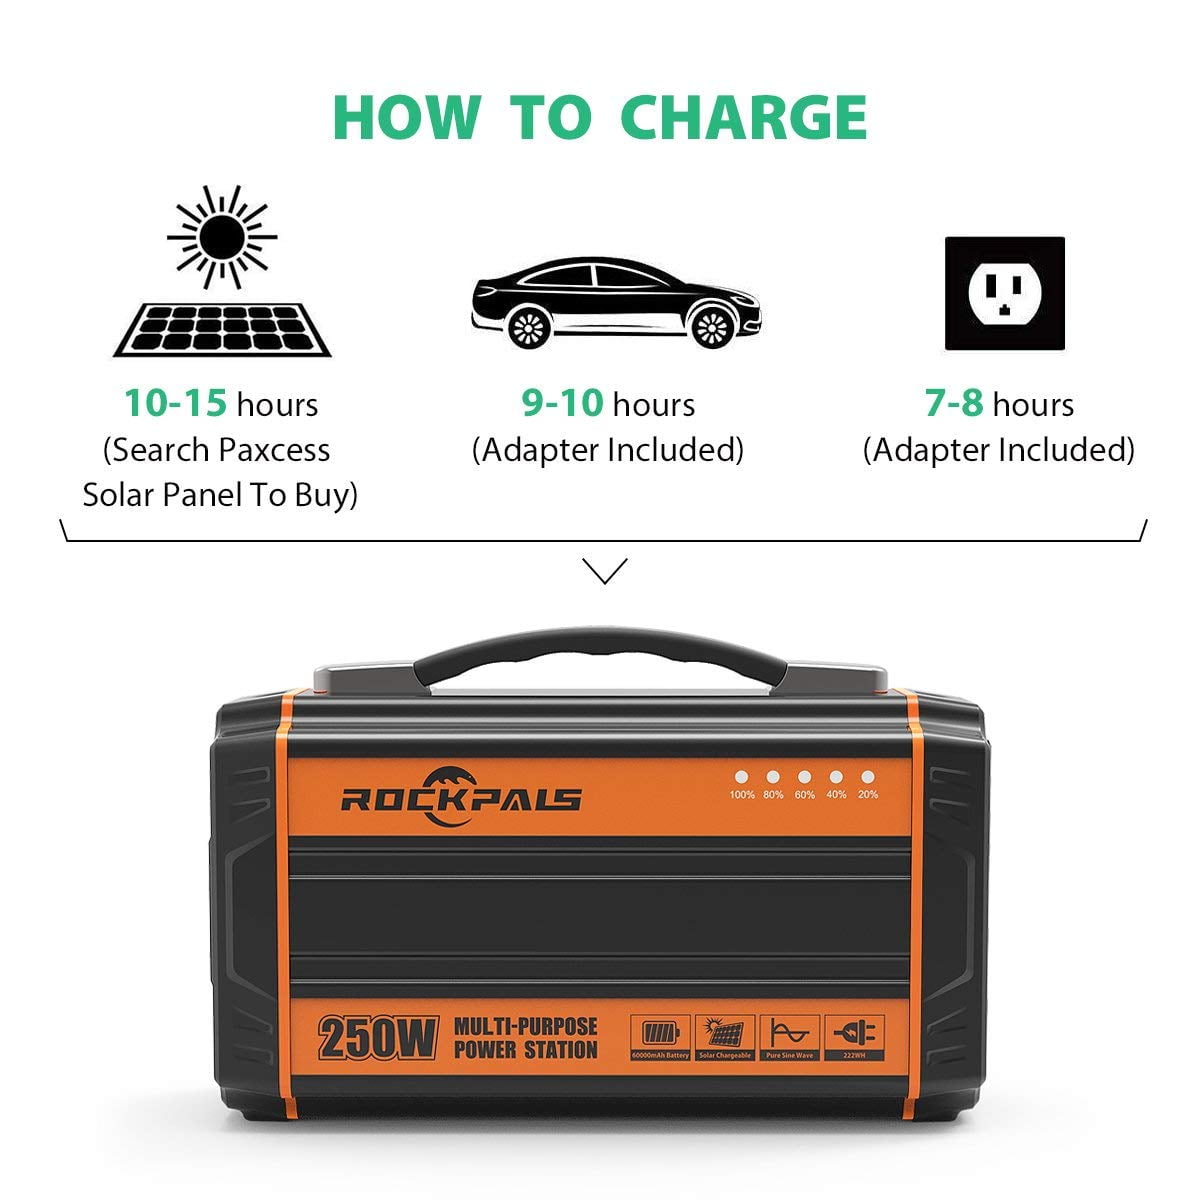 12V Car USB Output Off-Grid Power Supply for CPAP Backup Camping Emergency Rockpals 250-Watt Portable Generator Rechargeable Lithium Battery Pack Solar Generator with 110V AC Outlet